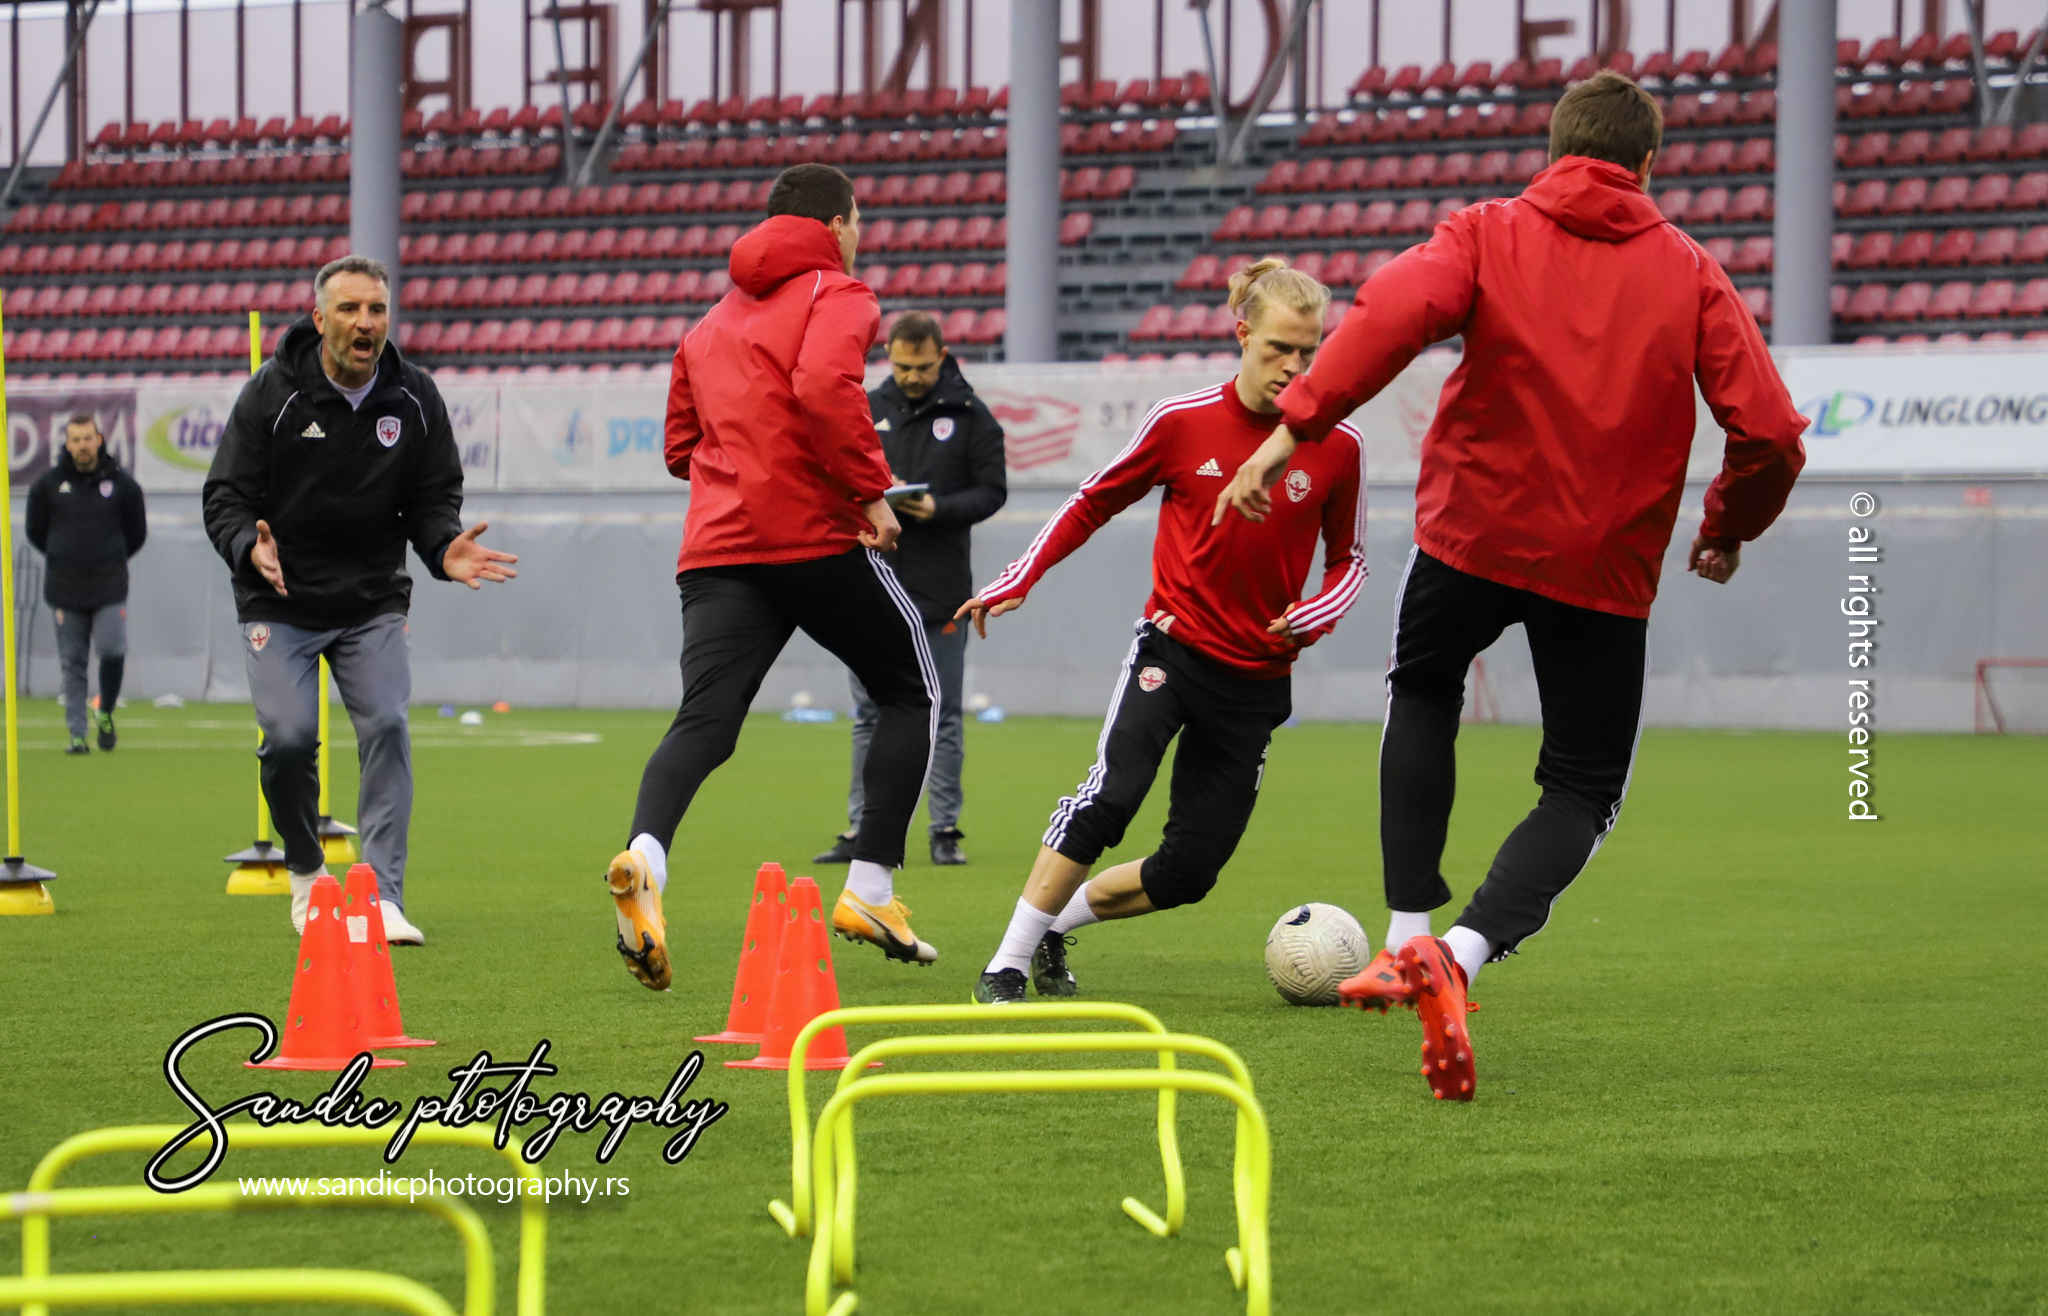 FC Voždovac – new staff and first training 13.04.2021 (photo gallery)